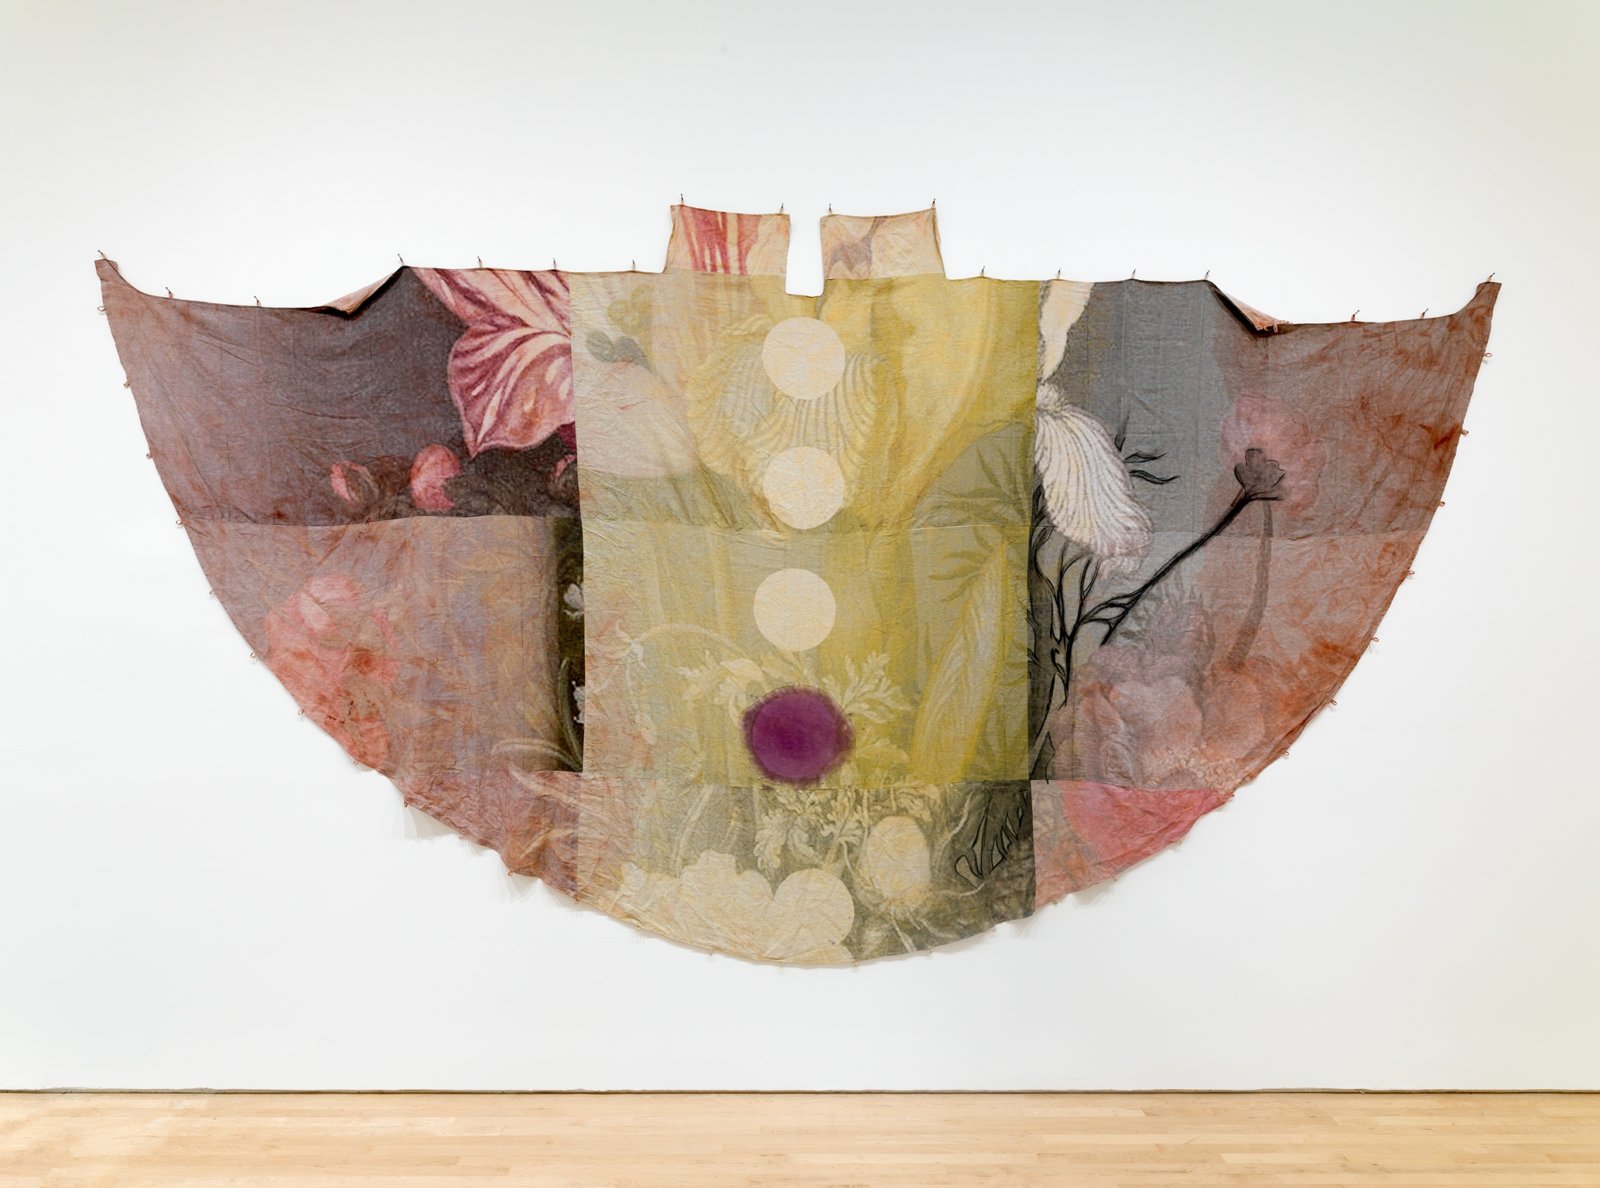 Duane Linklater, can the circle be unbroken 2, 2019, digital print on linen, iron red dye, cypress yellow ochre, blueberry extract, charcoal, nails, 120 x 240 in. (305 x 610 cm). Installation view, SOFT POWER, SF MOMA, San Francisco, USA, 2019